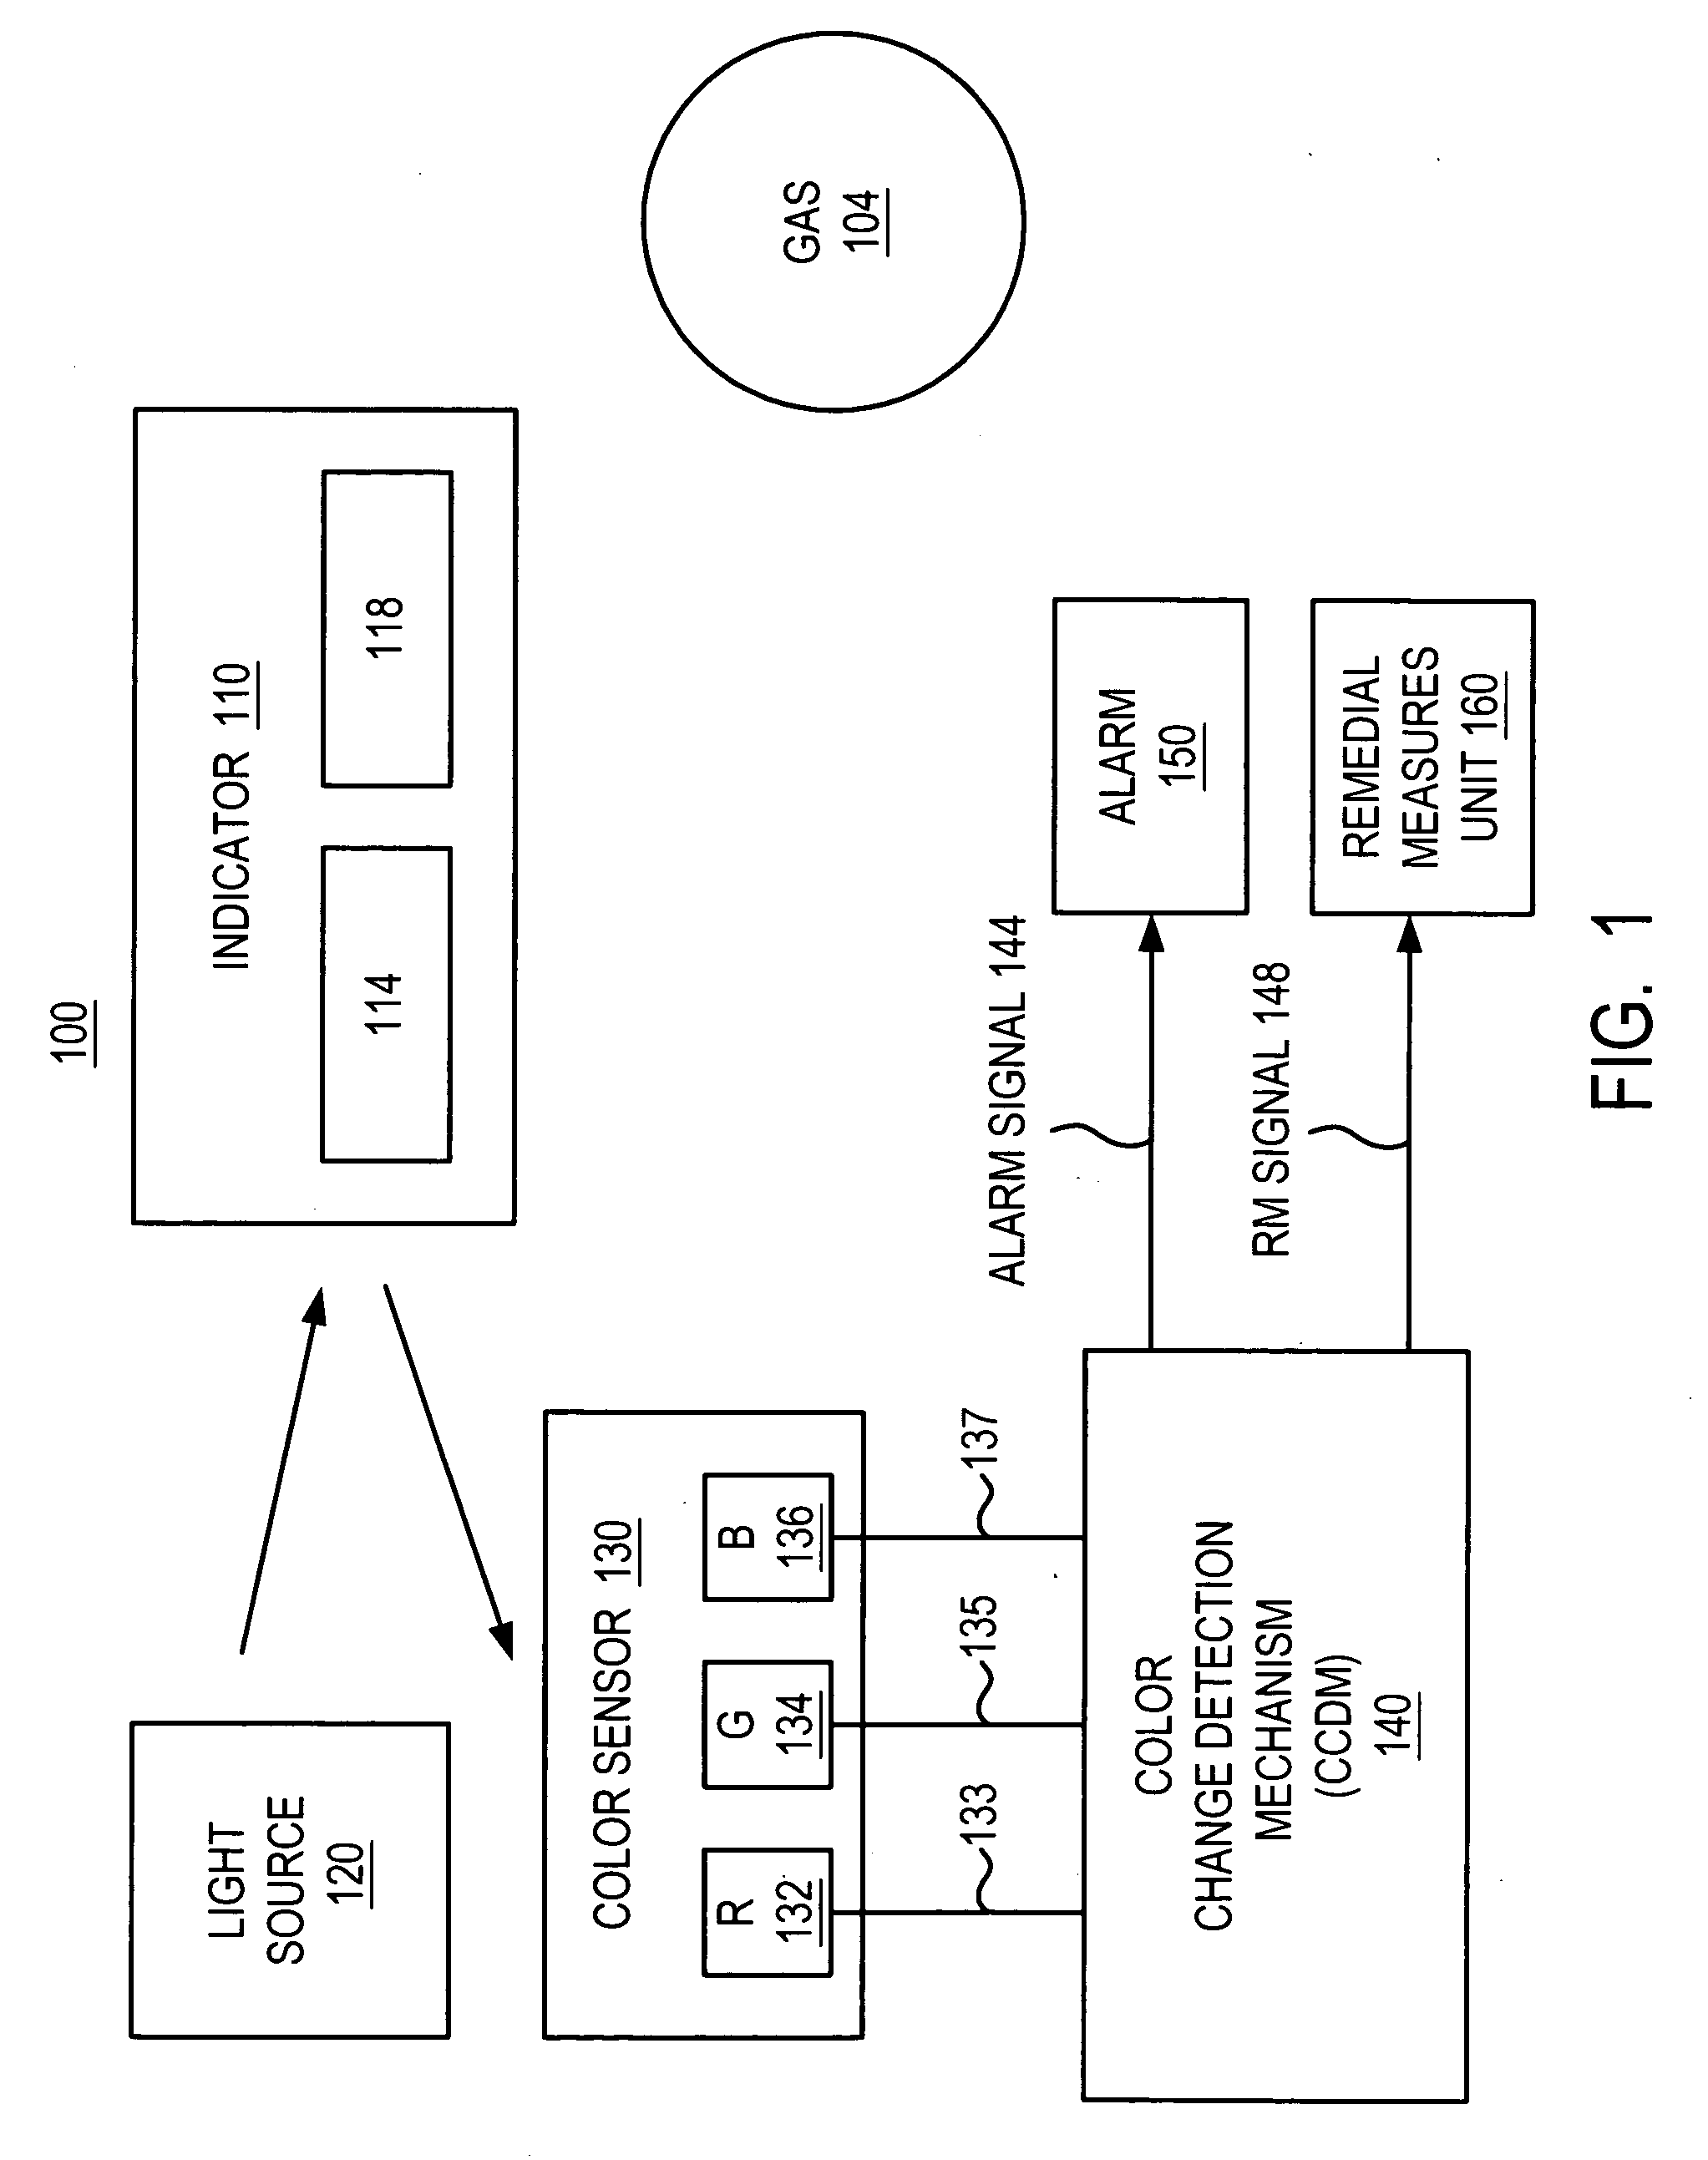 Method and apparatus for detecting gas/radiation that employs color change detection mechanism